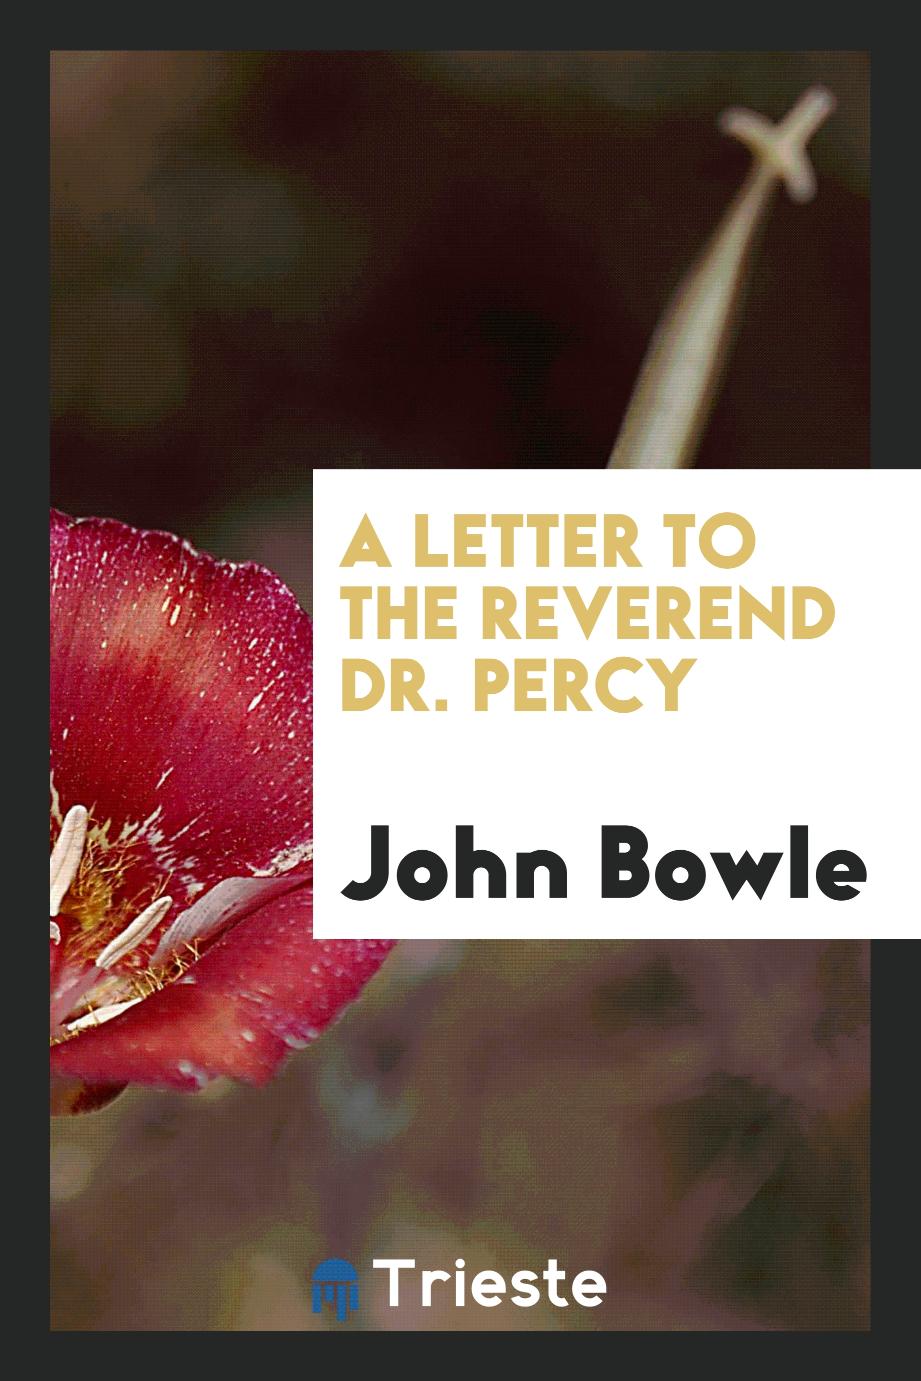 A Letter to the Reverend Dr. Percy